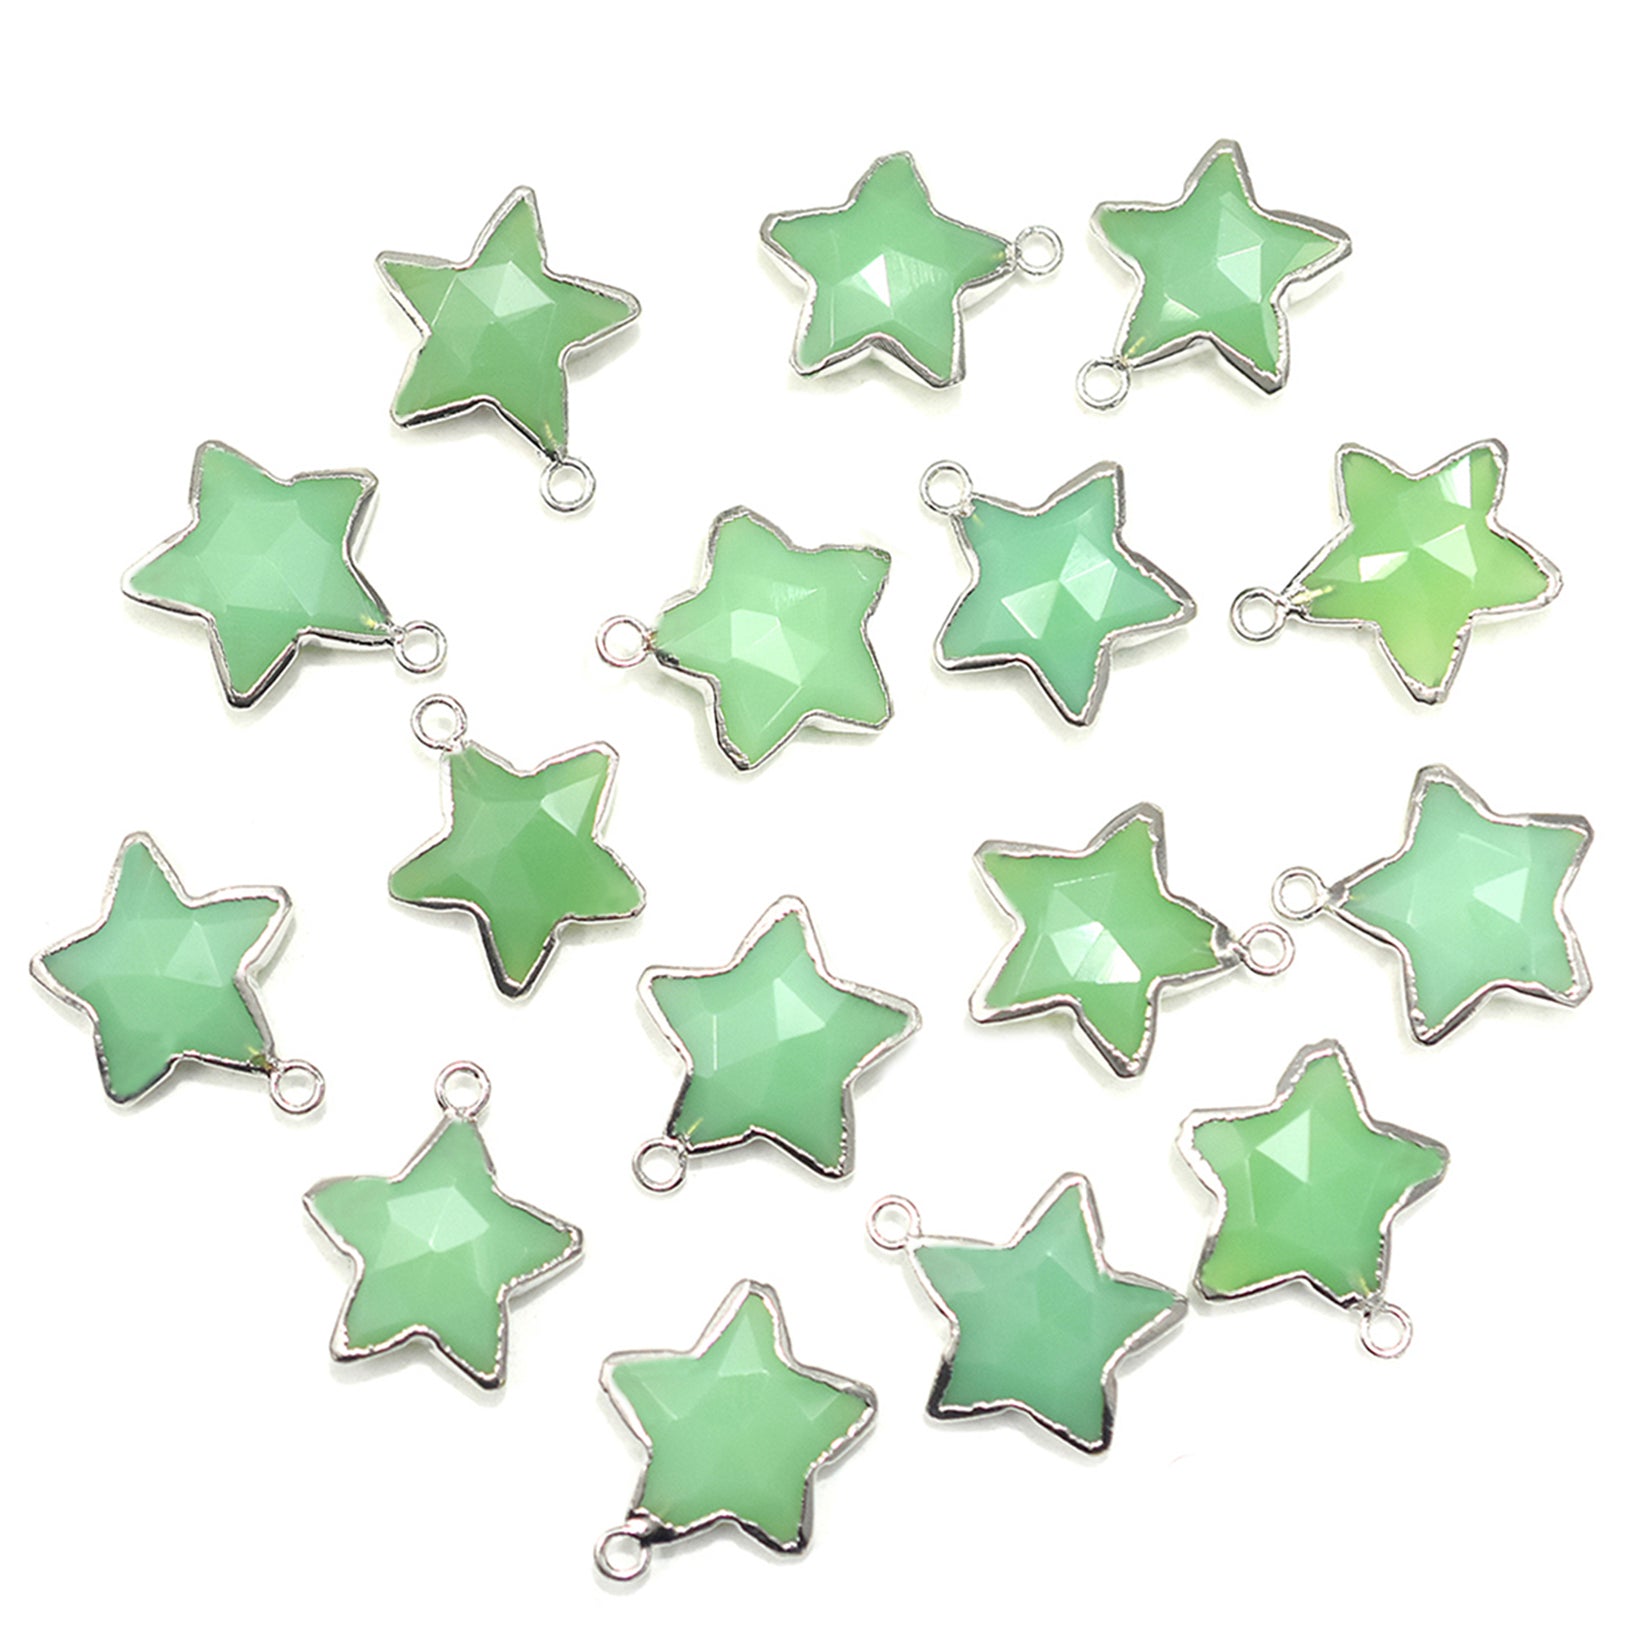 Chrysoprase Chalcedony 10 To 11 MM Star Shape Rhodium Electroplated Pendant (Set Of 2 Pcs)